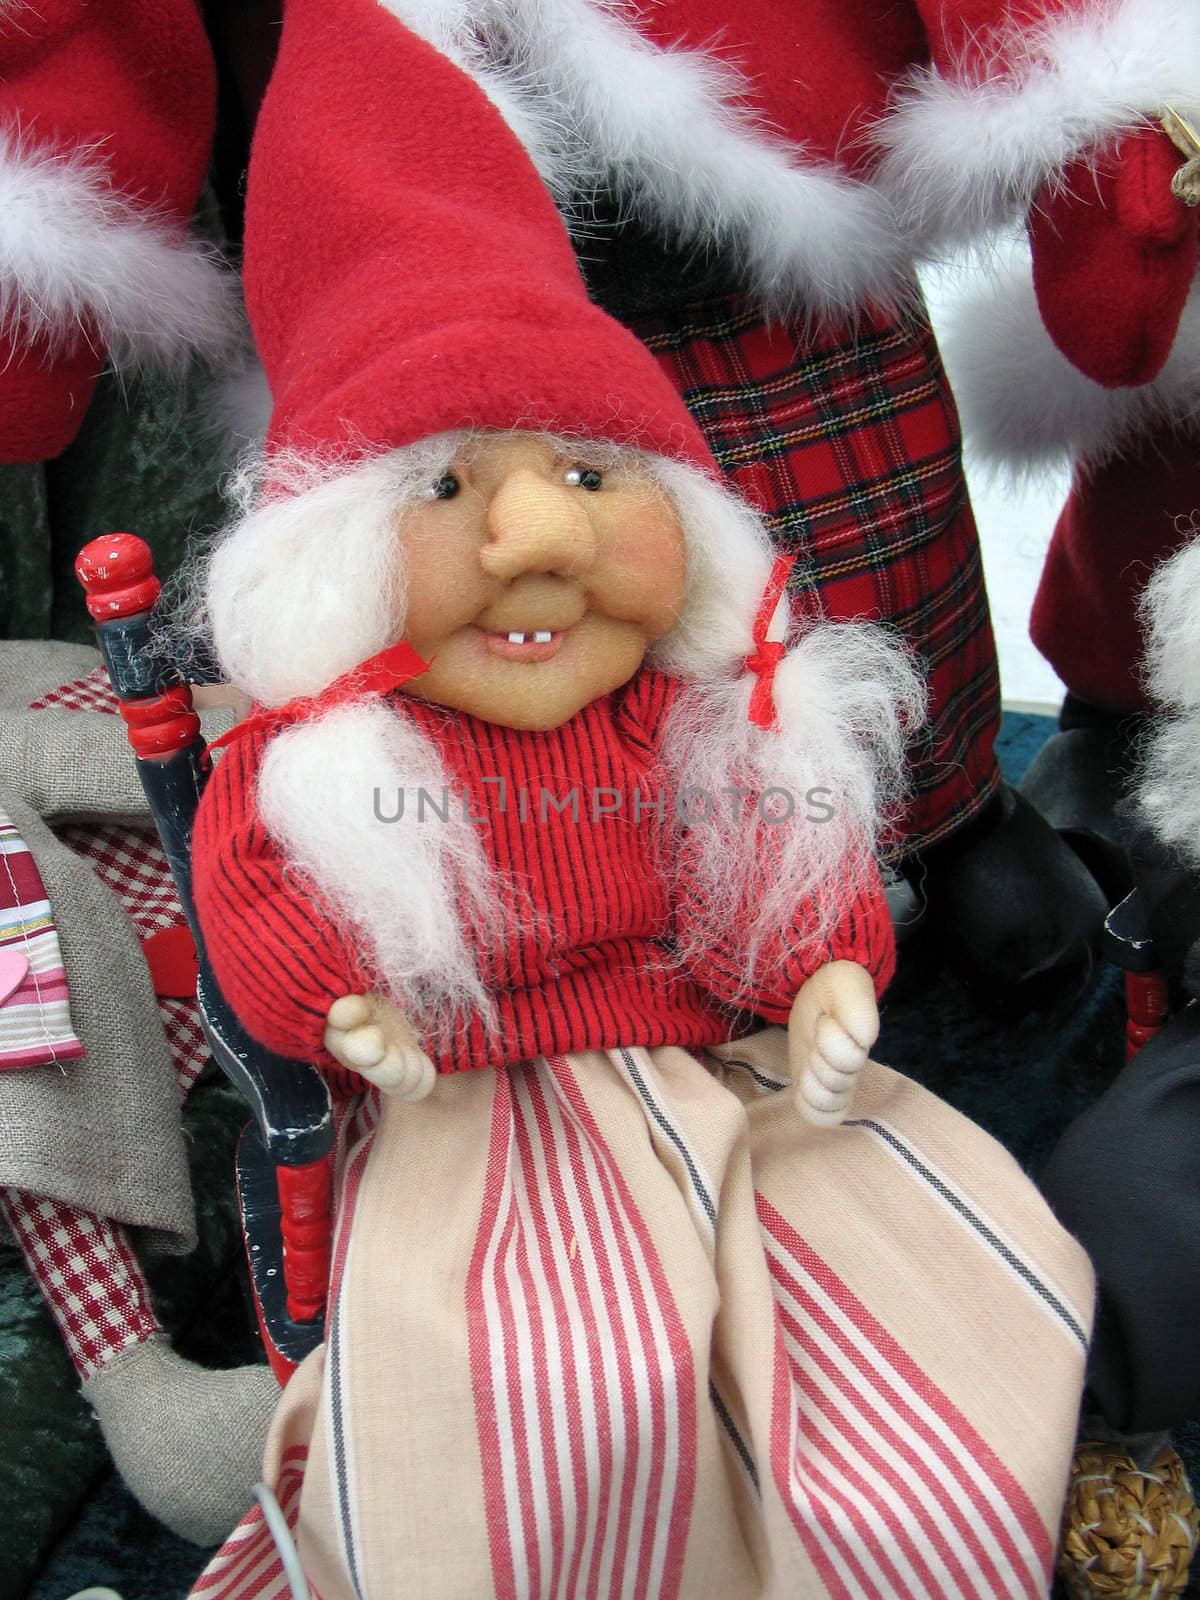 Christmas doll figurine of grandmother by Ronyzmbow